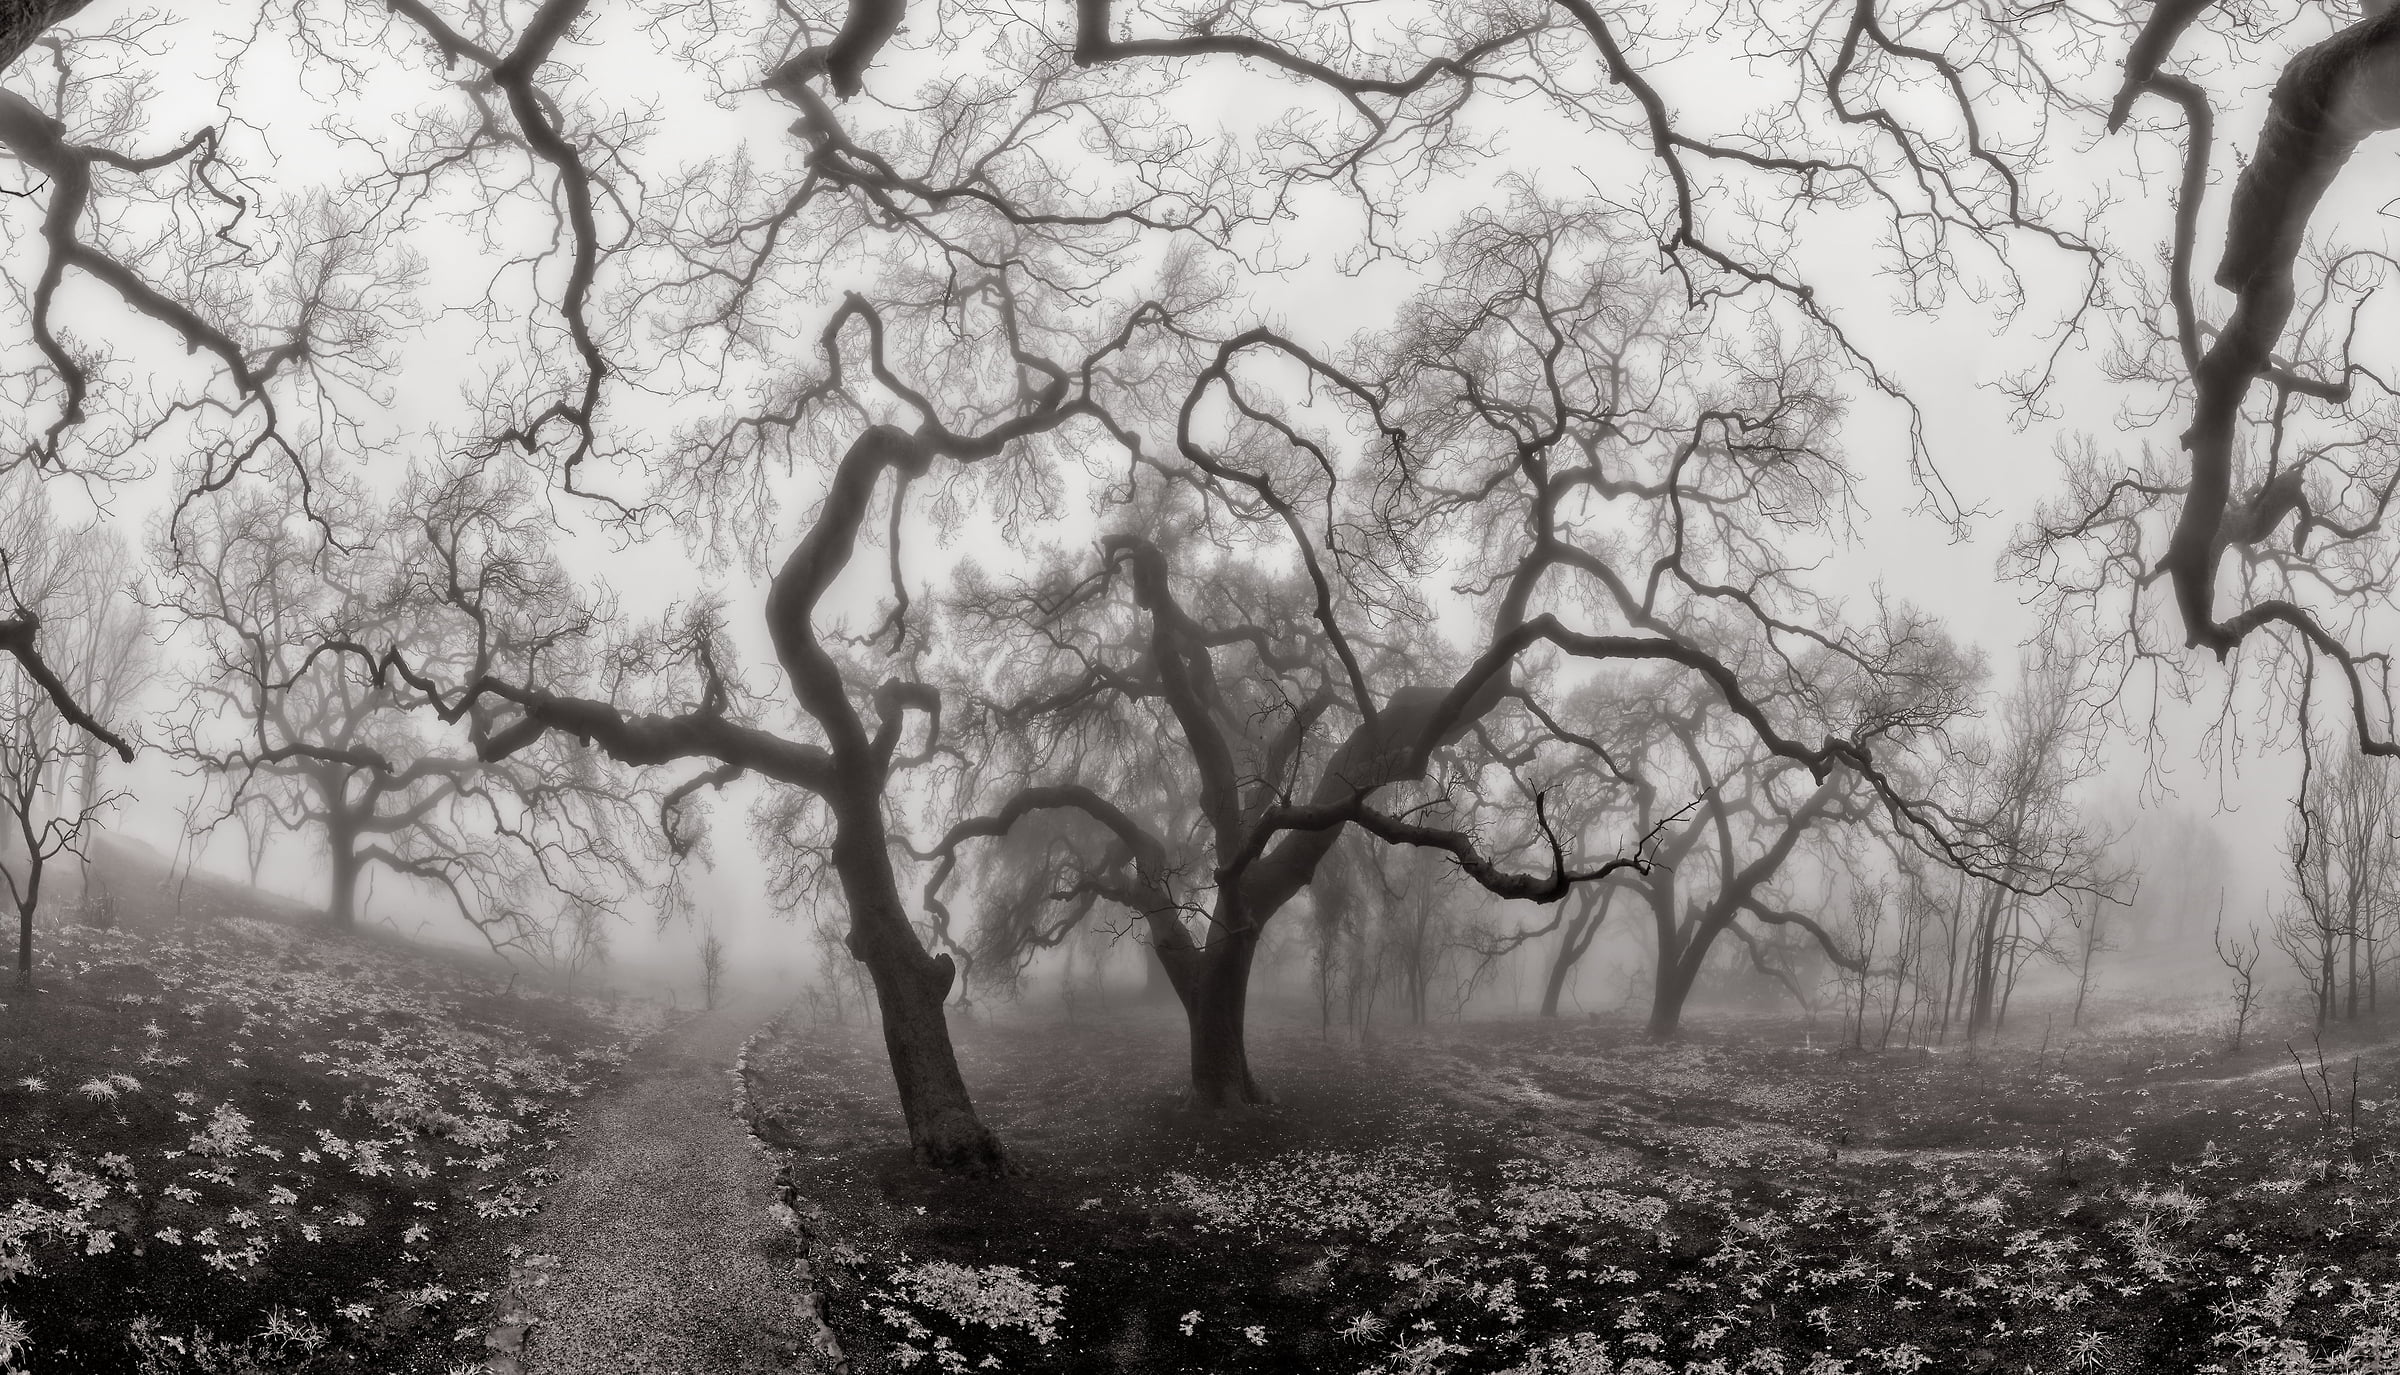 512 megapixels! A very high resolution, large-format VAST photo print of an eerie forest; photograph created by Peter Rodger in Nicolas Ridge, Malibu, California